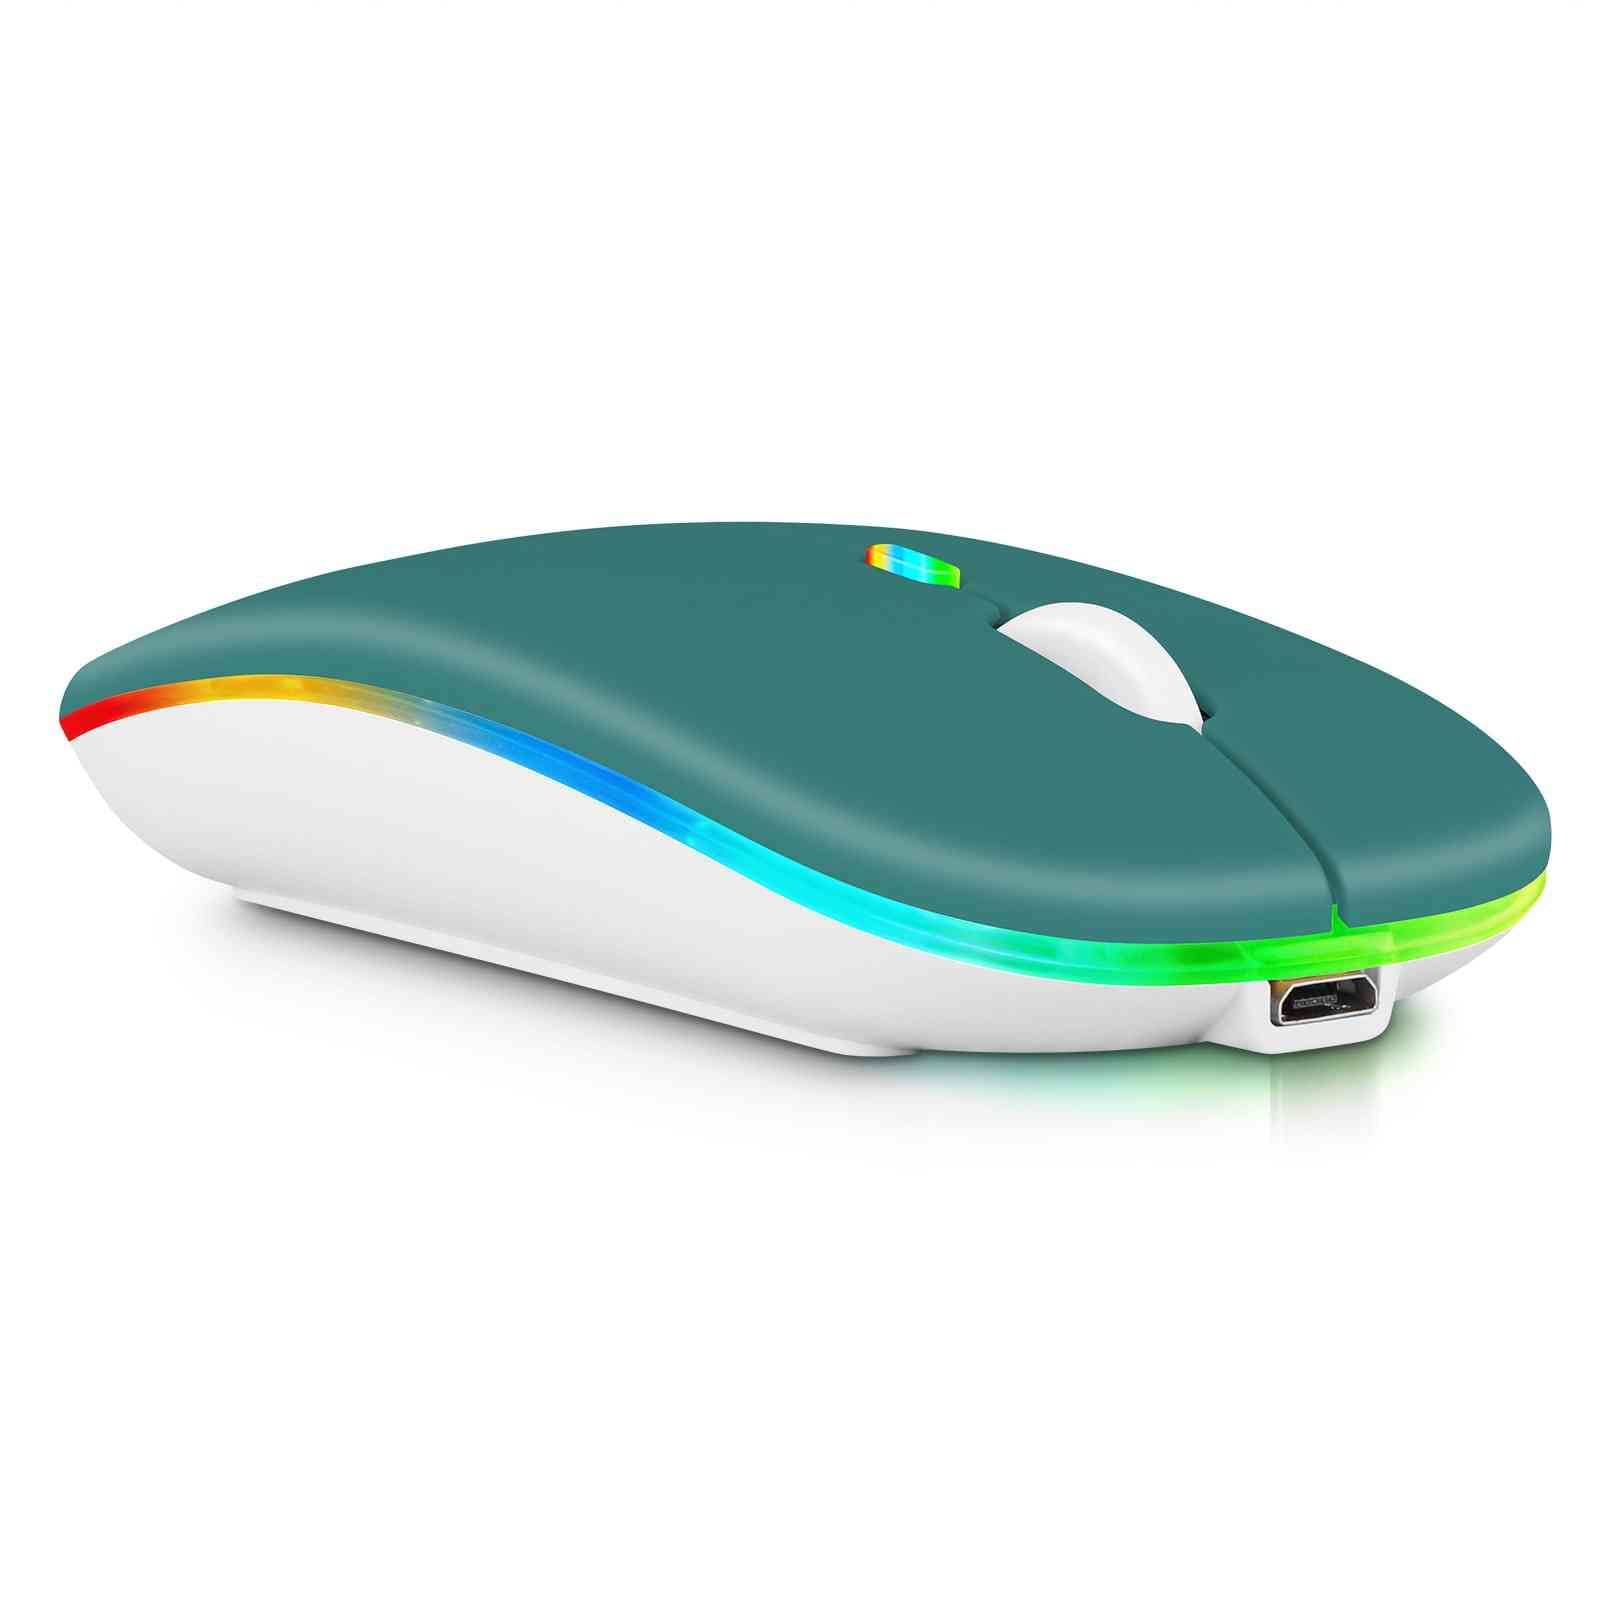 2.4GHz & Bluetooth Mouse, Rechargeable Wireless Mouse for Nokia Bluetooth Wireless Mouse for Laptop / Mac / Computer / Tablet / RGB LED Deep Green - Walmart.com